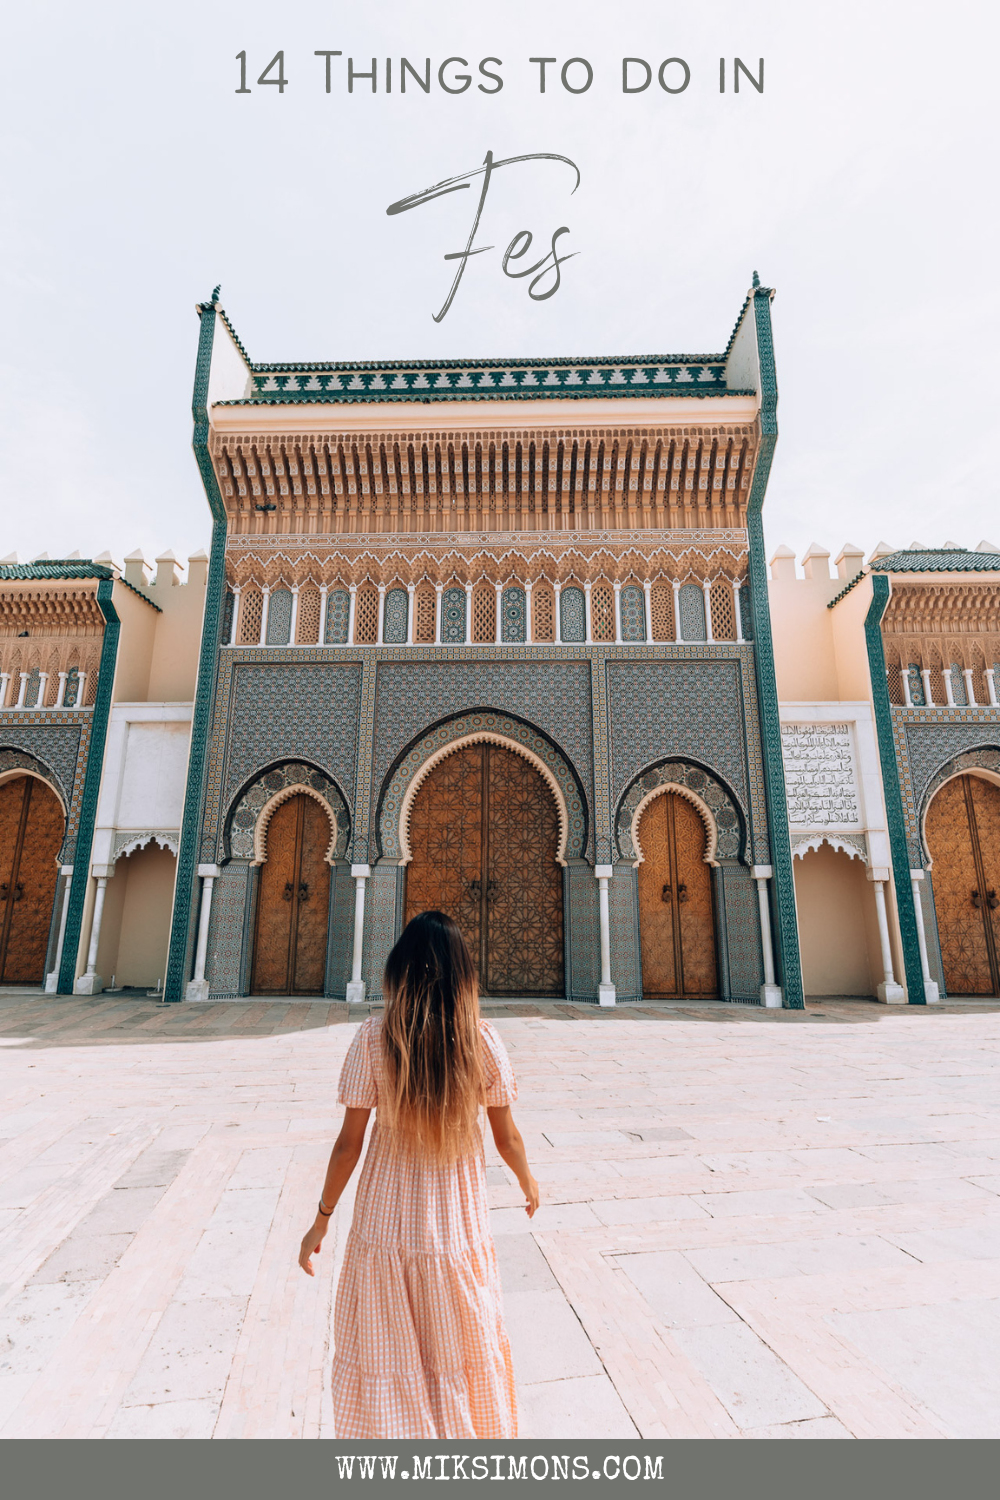 14 best Things to do in fes 1